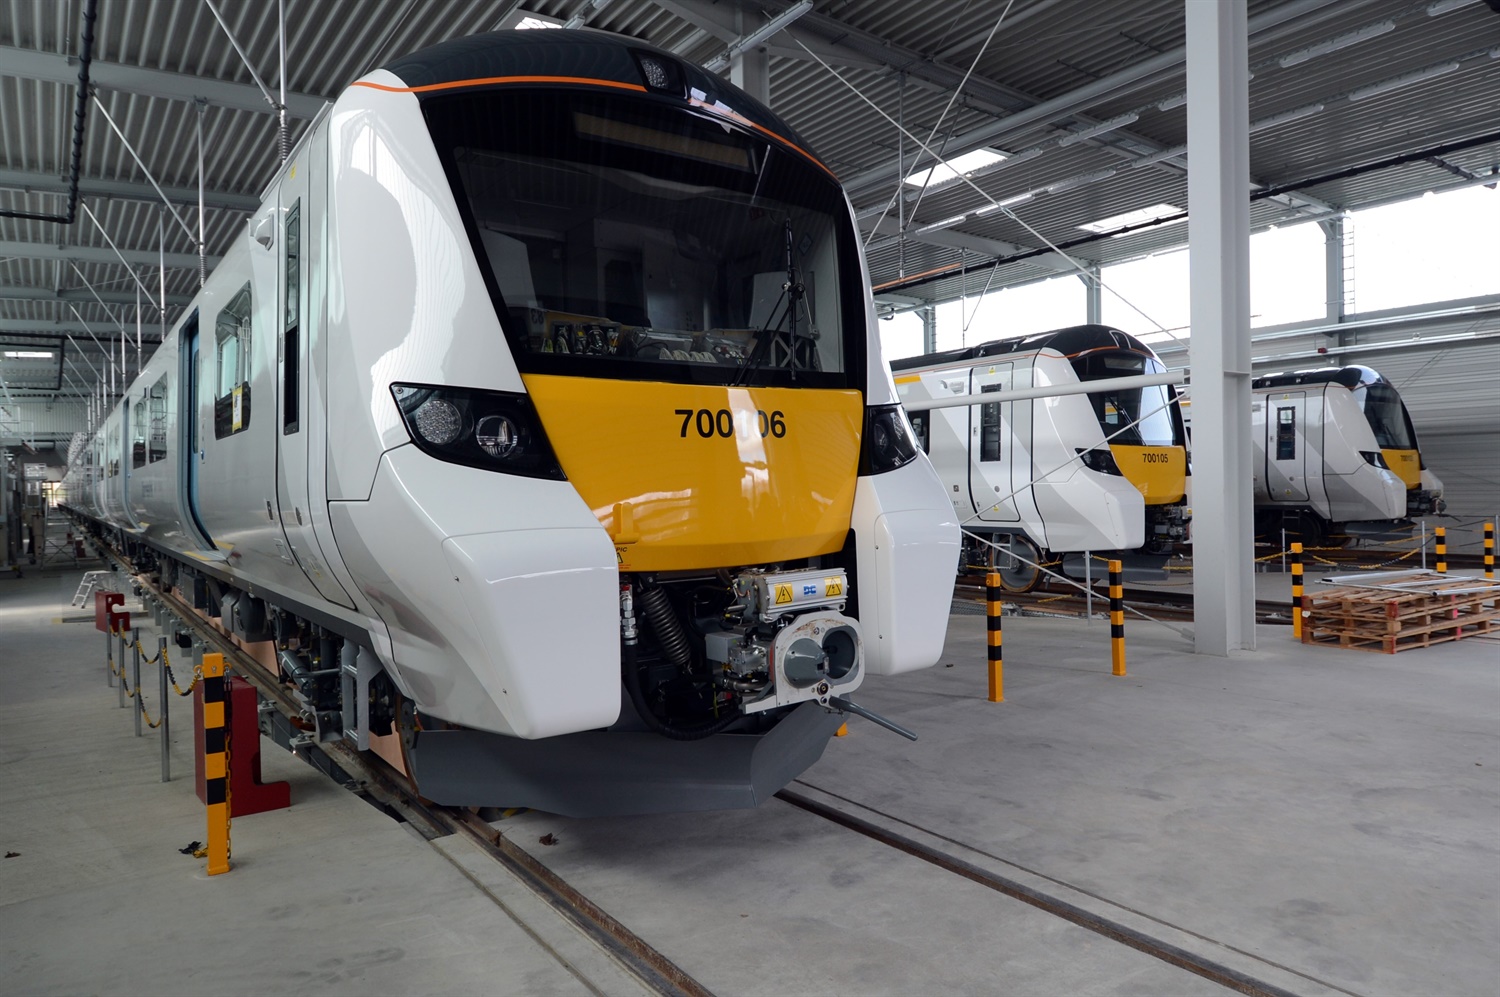 New photos of Thameslink Class 700 trains – construction ‘on track’